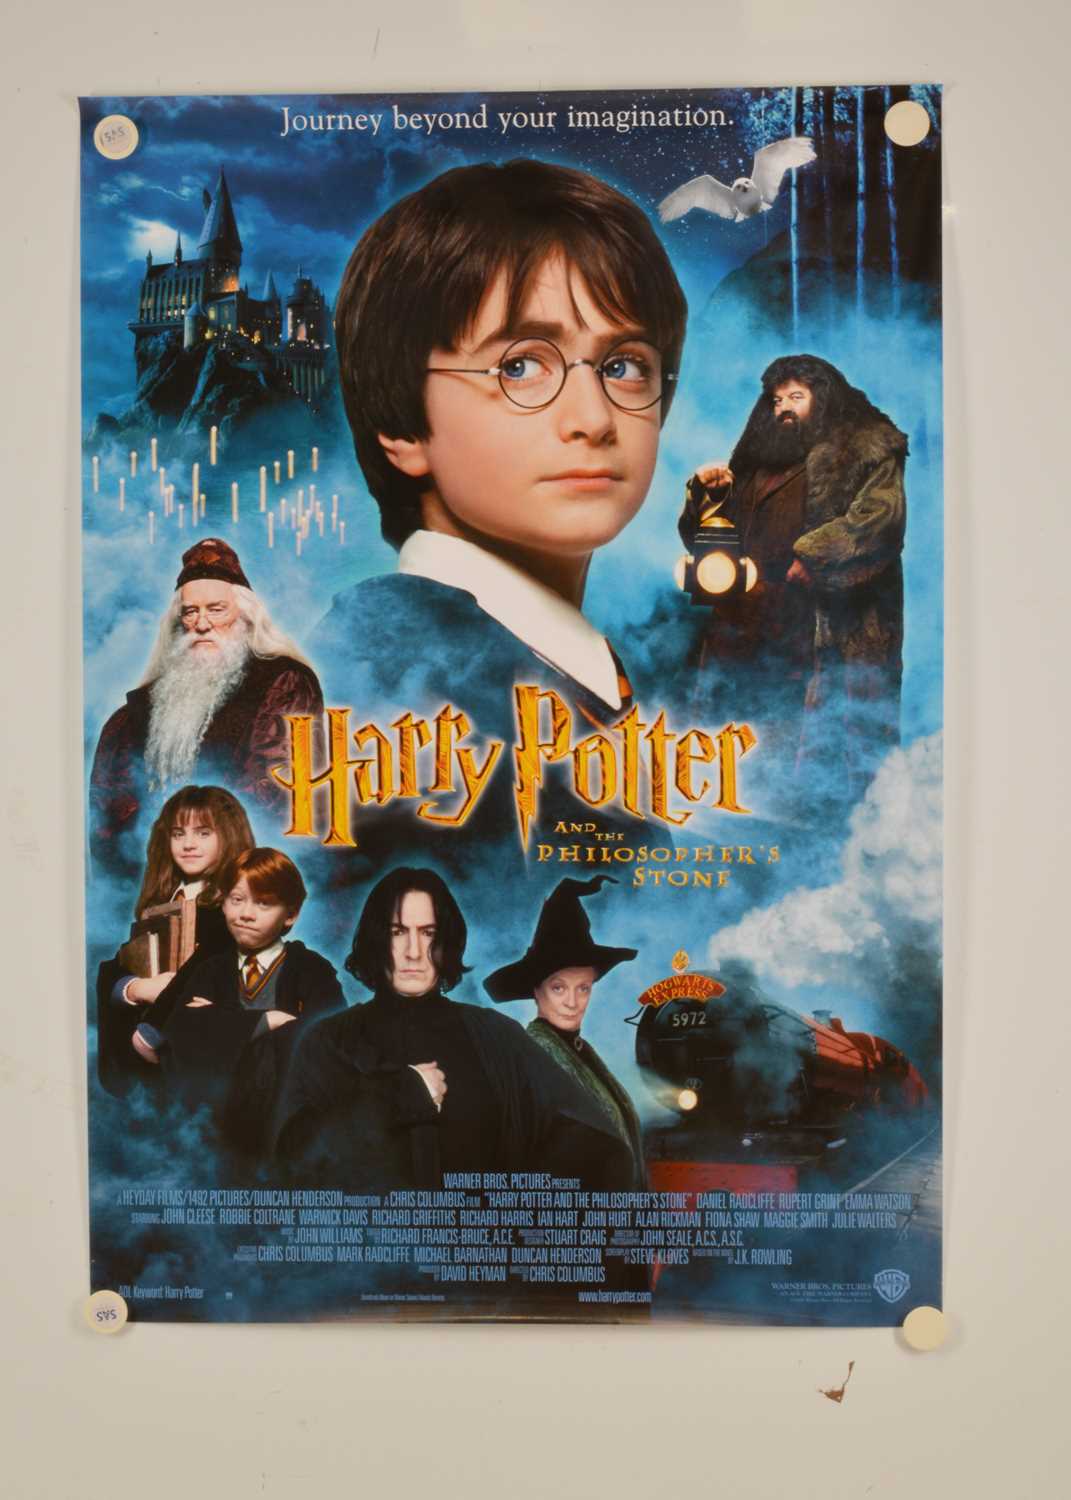 Harry Potter and the Philosopher's Stone Film Posters, - Image 2 of 3